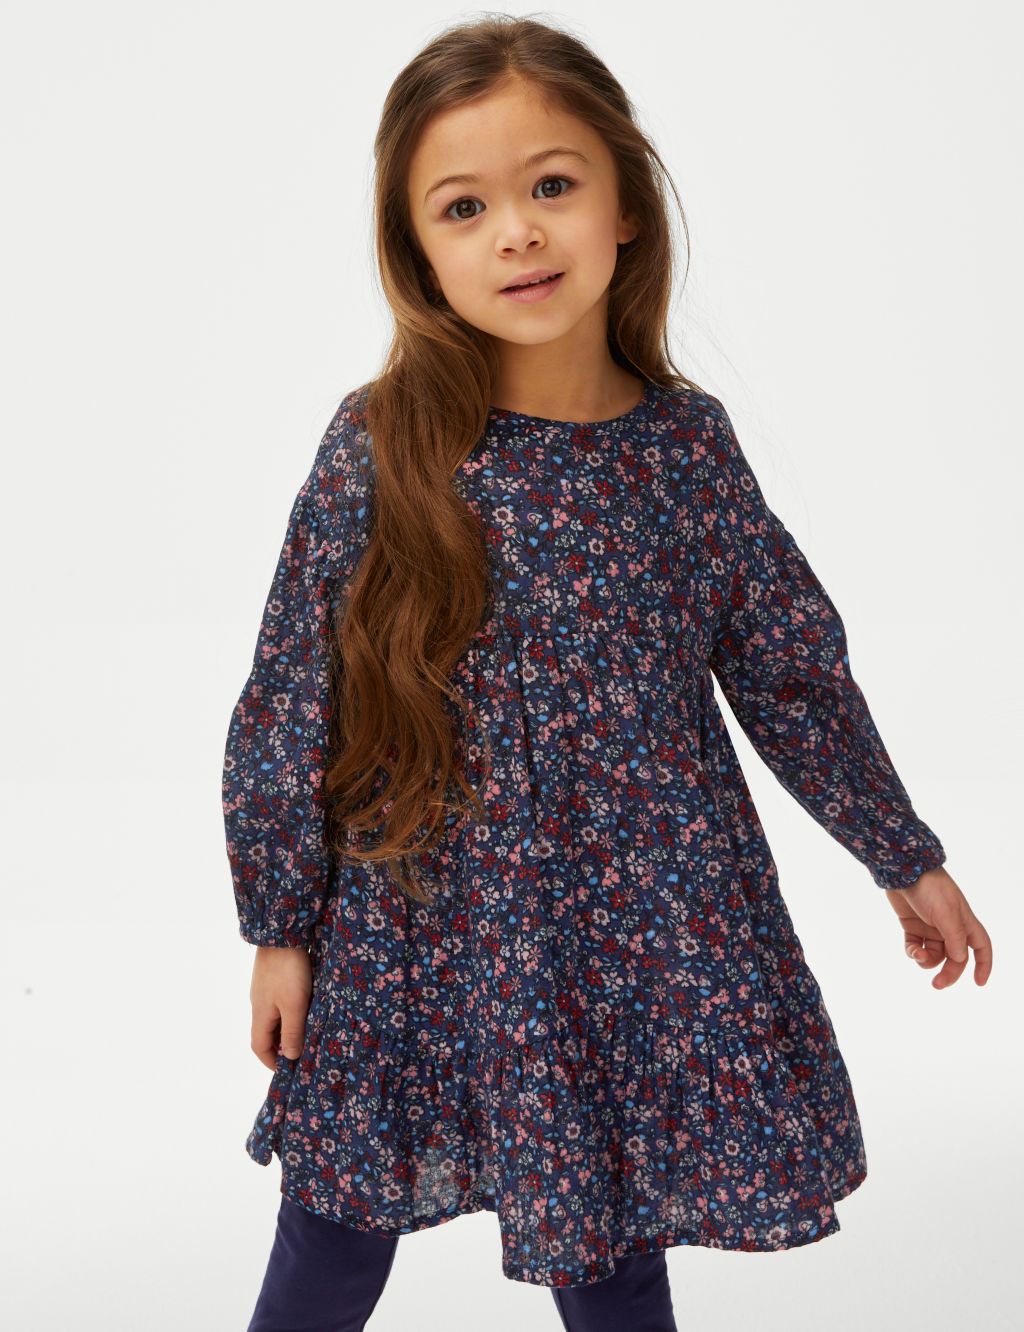 Buy Page 2 - Girls' Dresses from the M&S UK Online Shop